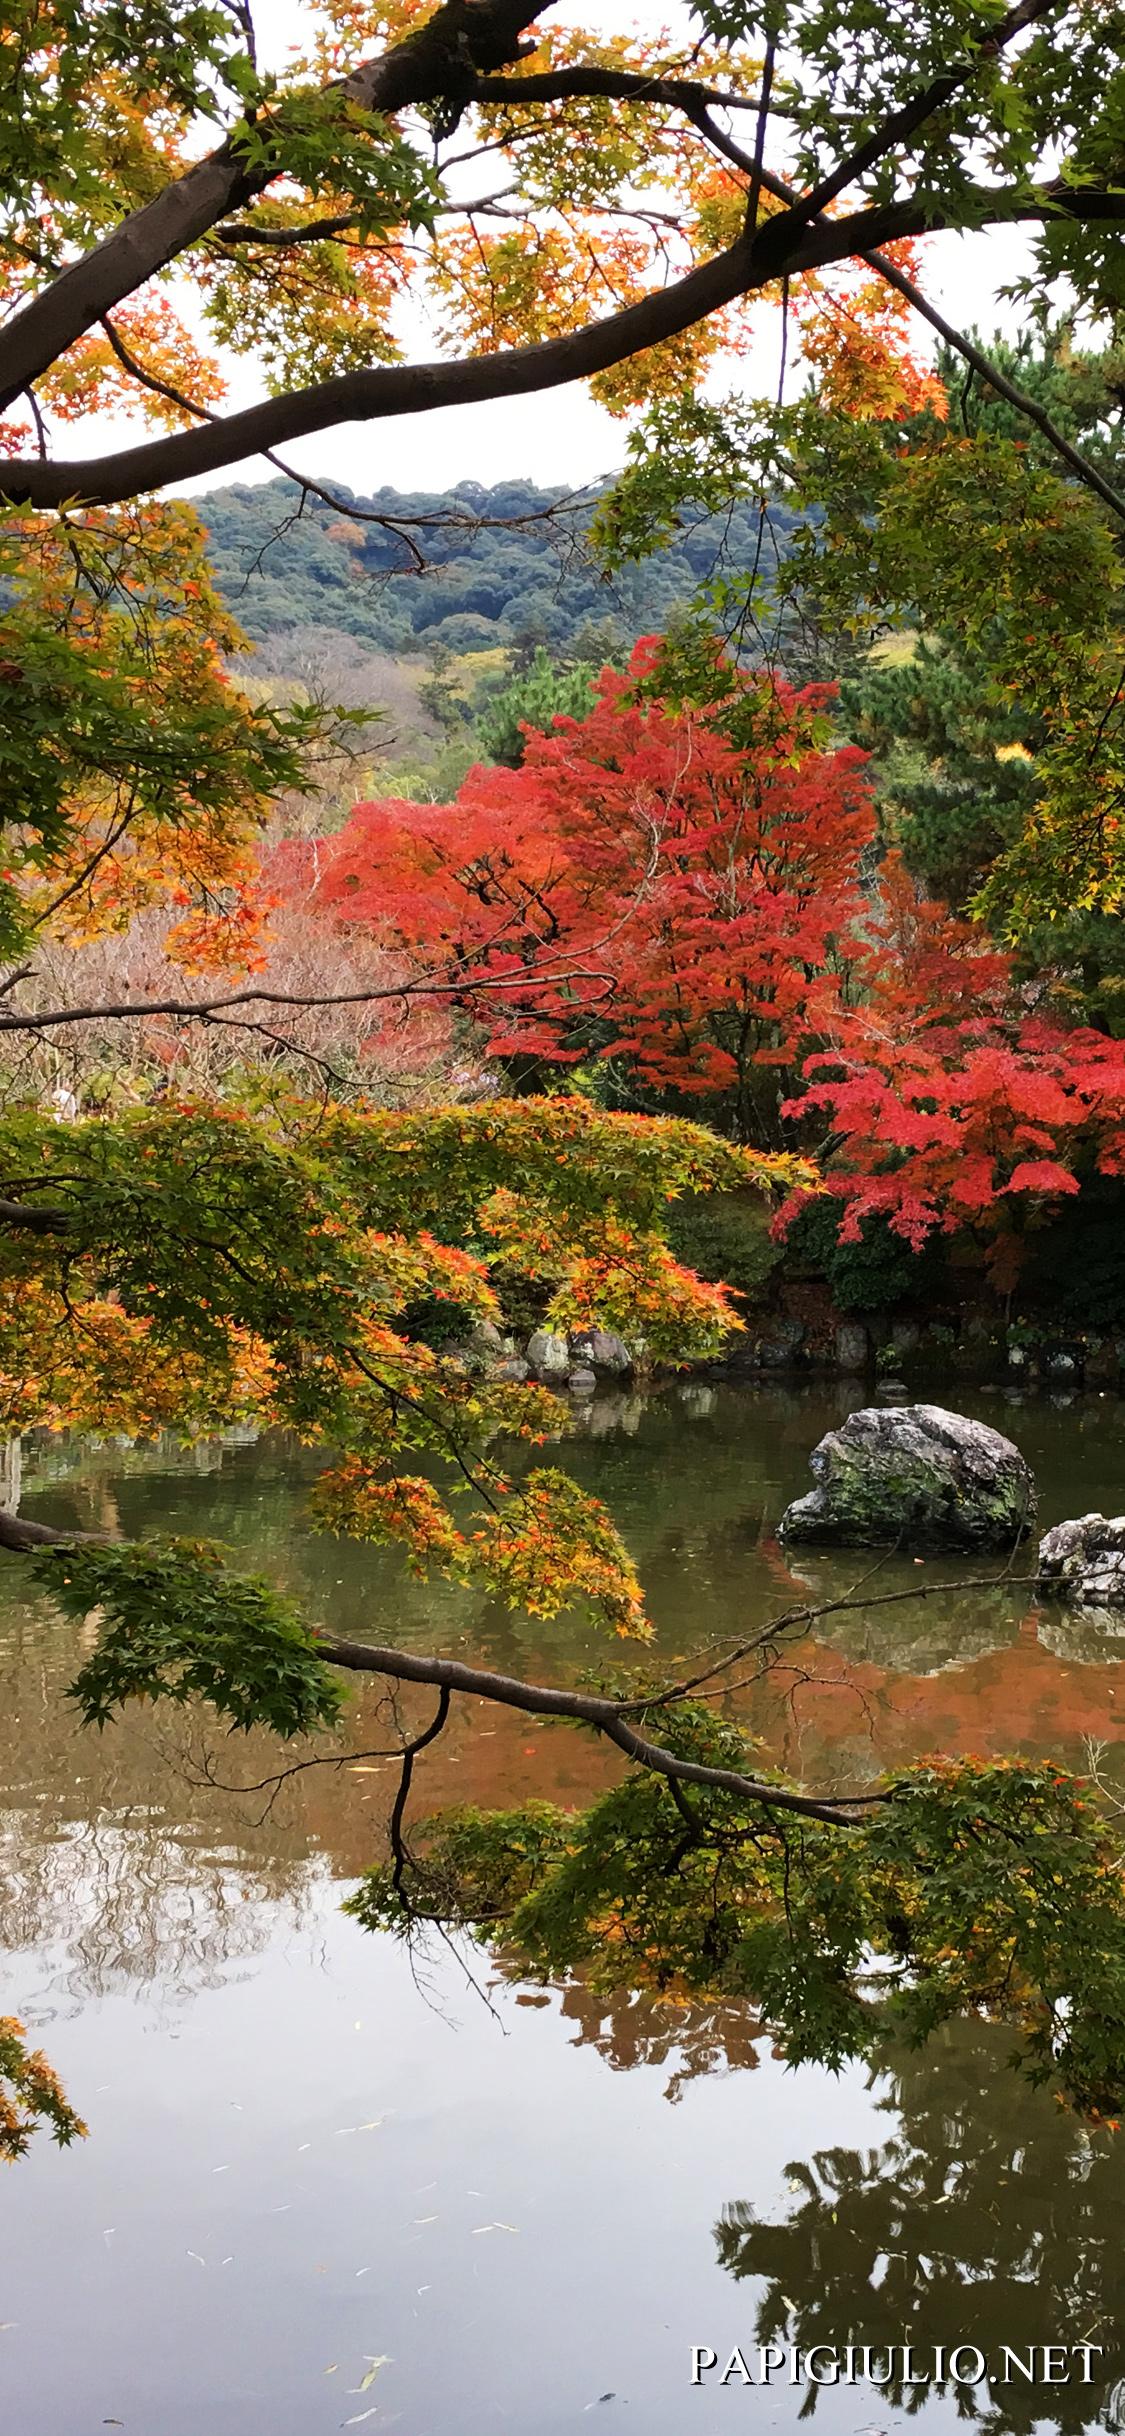 Kyoto Iphone Wallpapers - Top Free Kyoto Iphone Backgrounds ...